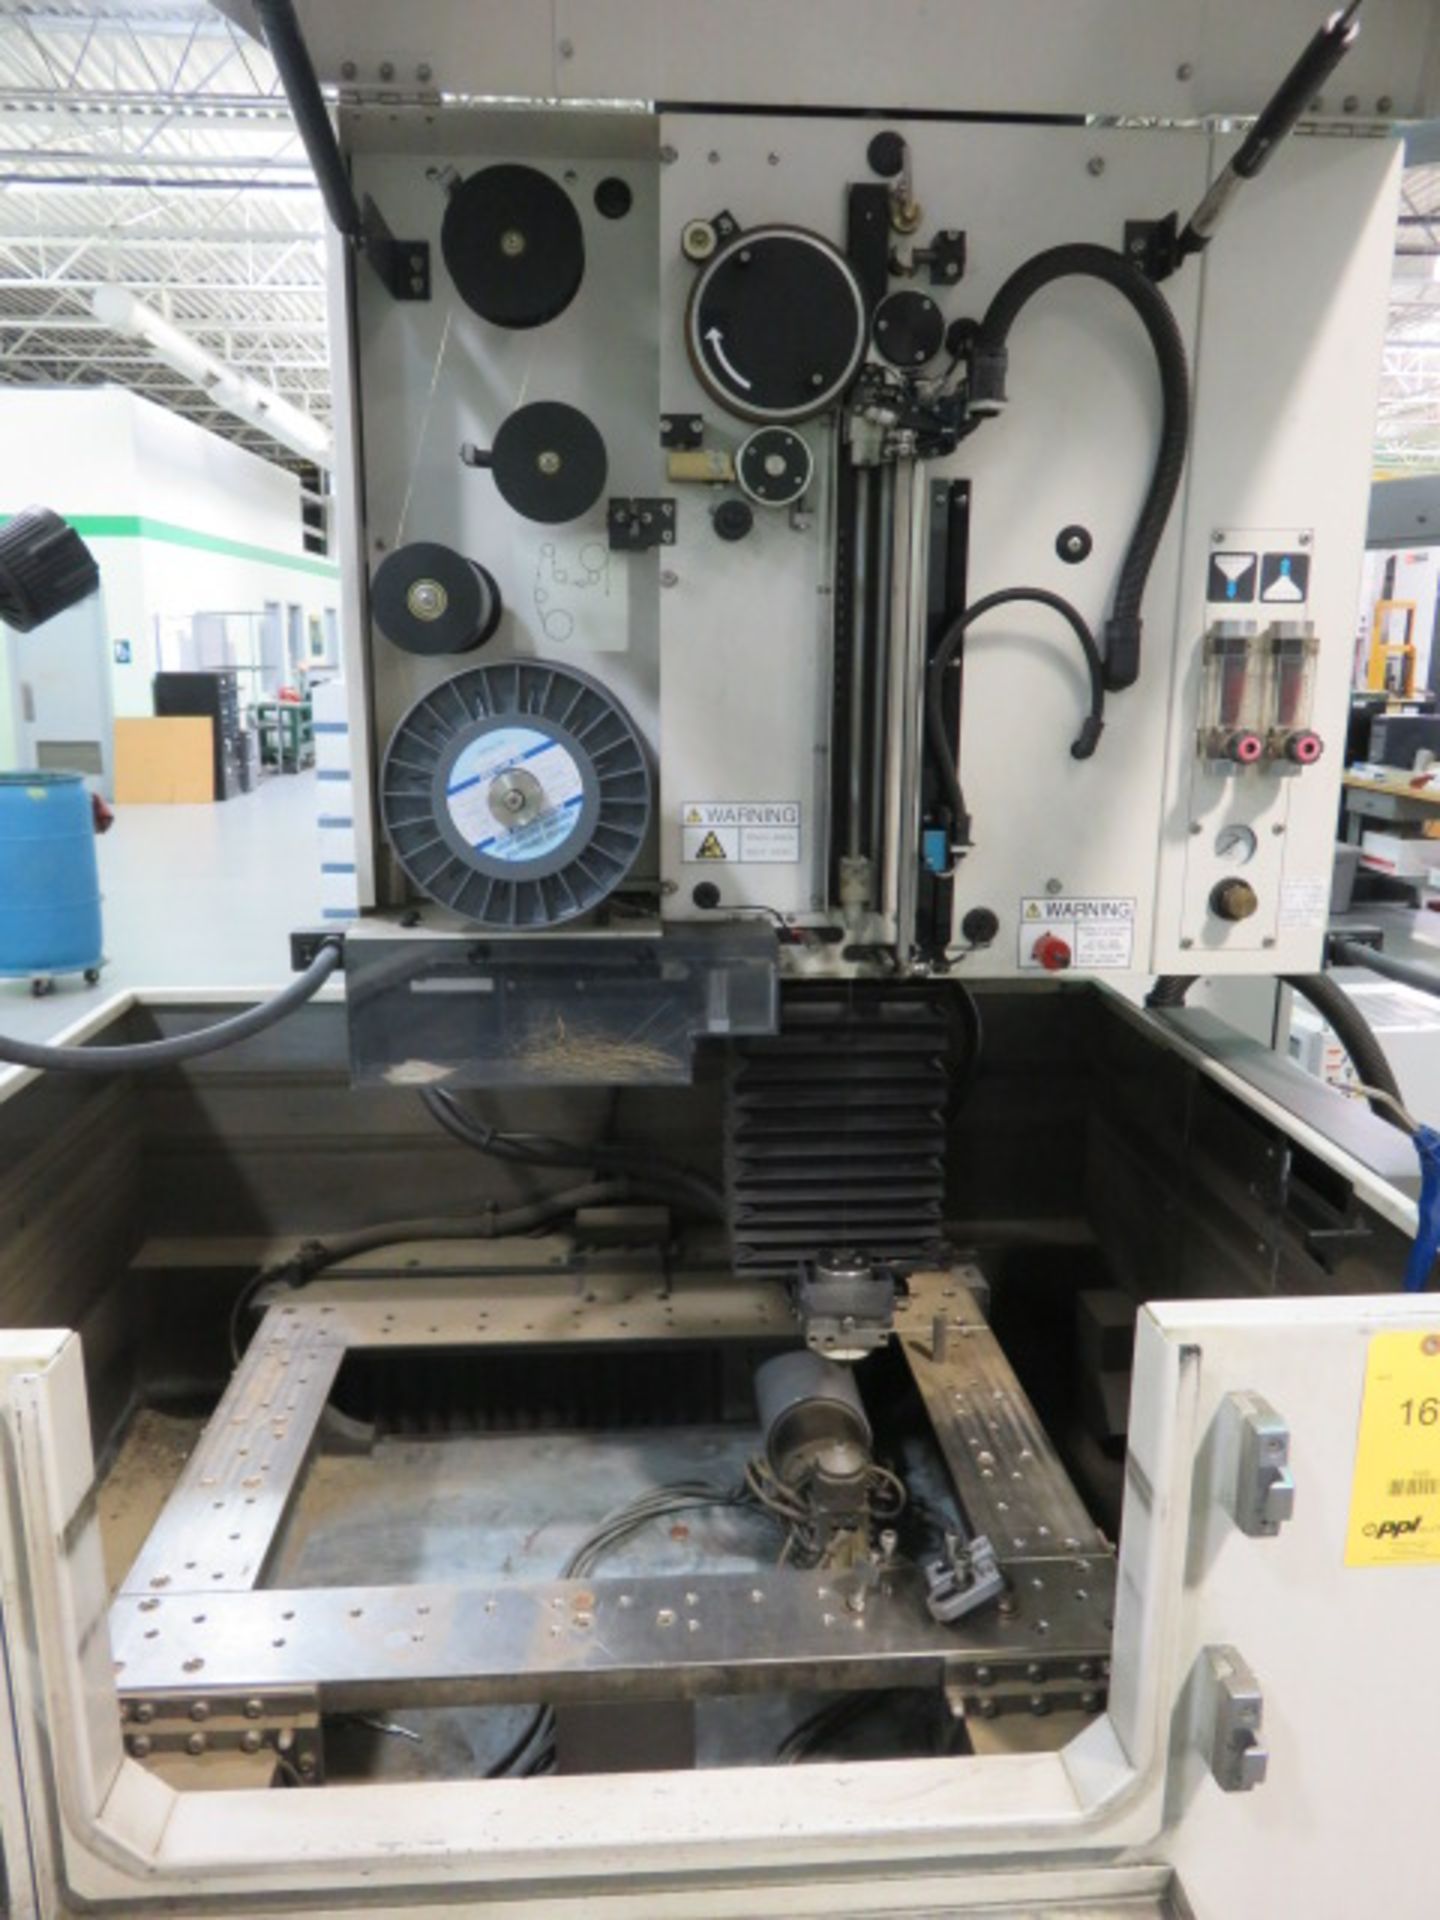 Fanuc 4-Axis CNC Wire EDM Machine Model Robocut AX-1iC, S/N P051C1571 (2005), 43 in. x 33 in. x 21 i - Image 2 of 6